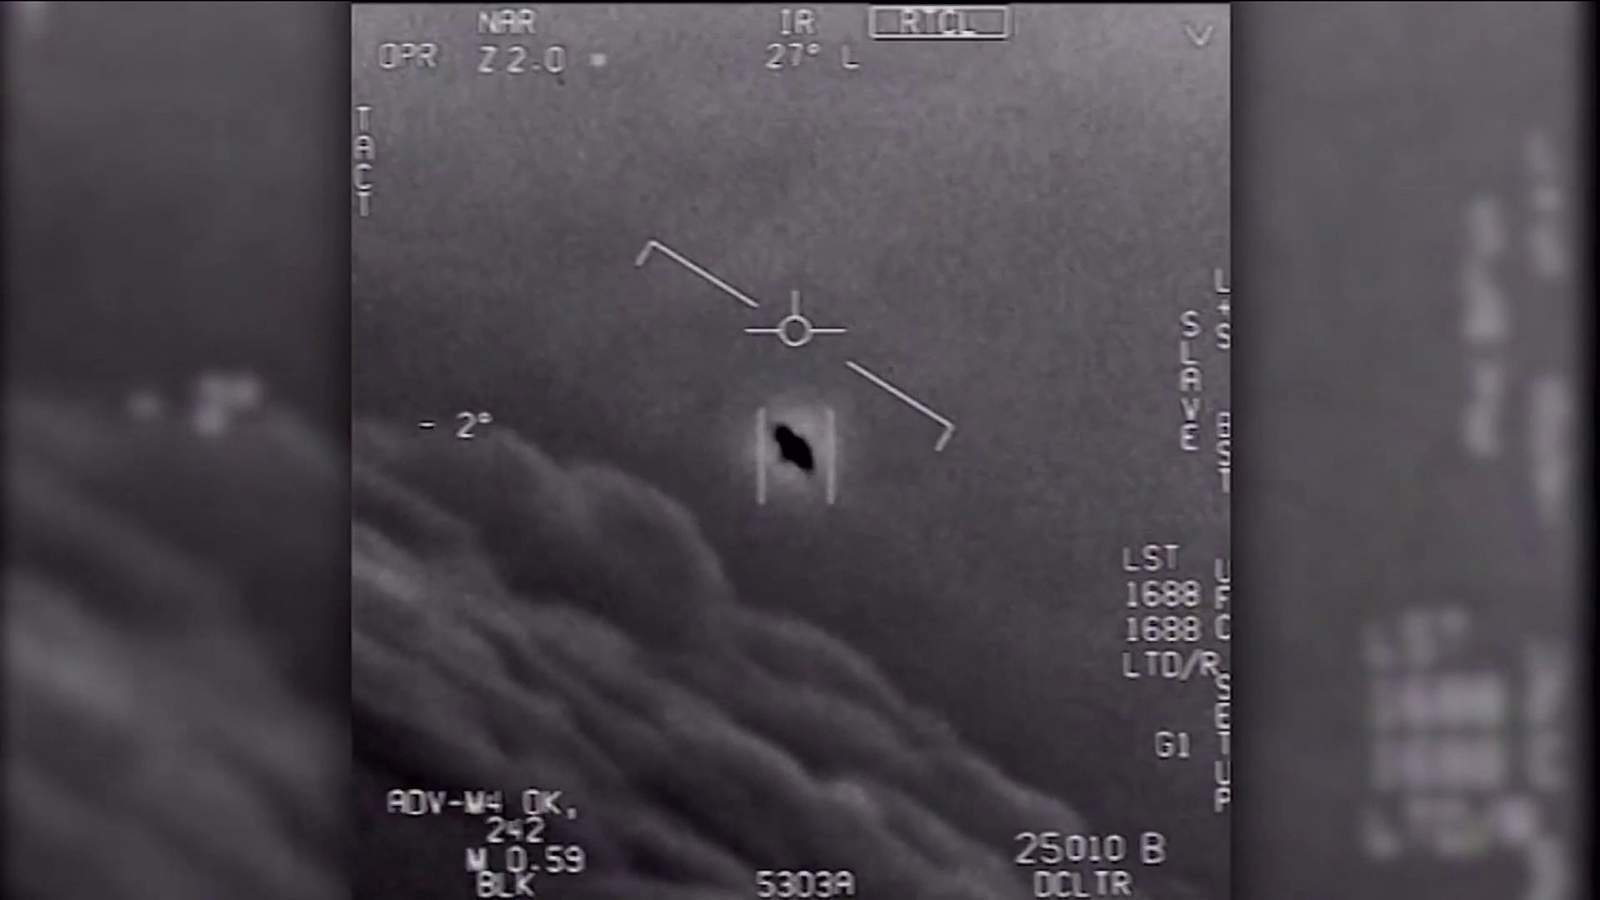 Pentagon confirms authenticity of UFO videos, including one off Jacksonville coast